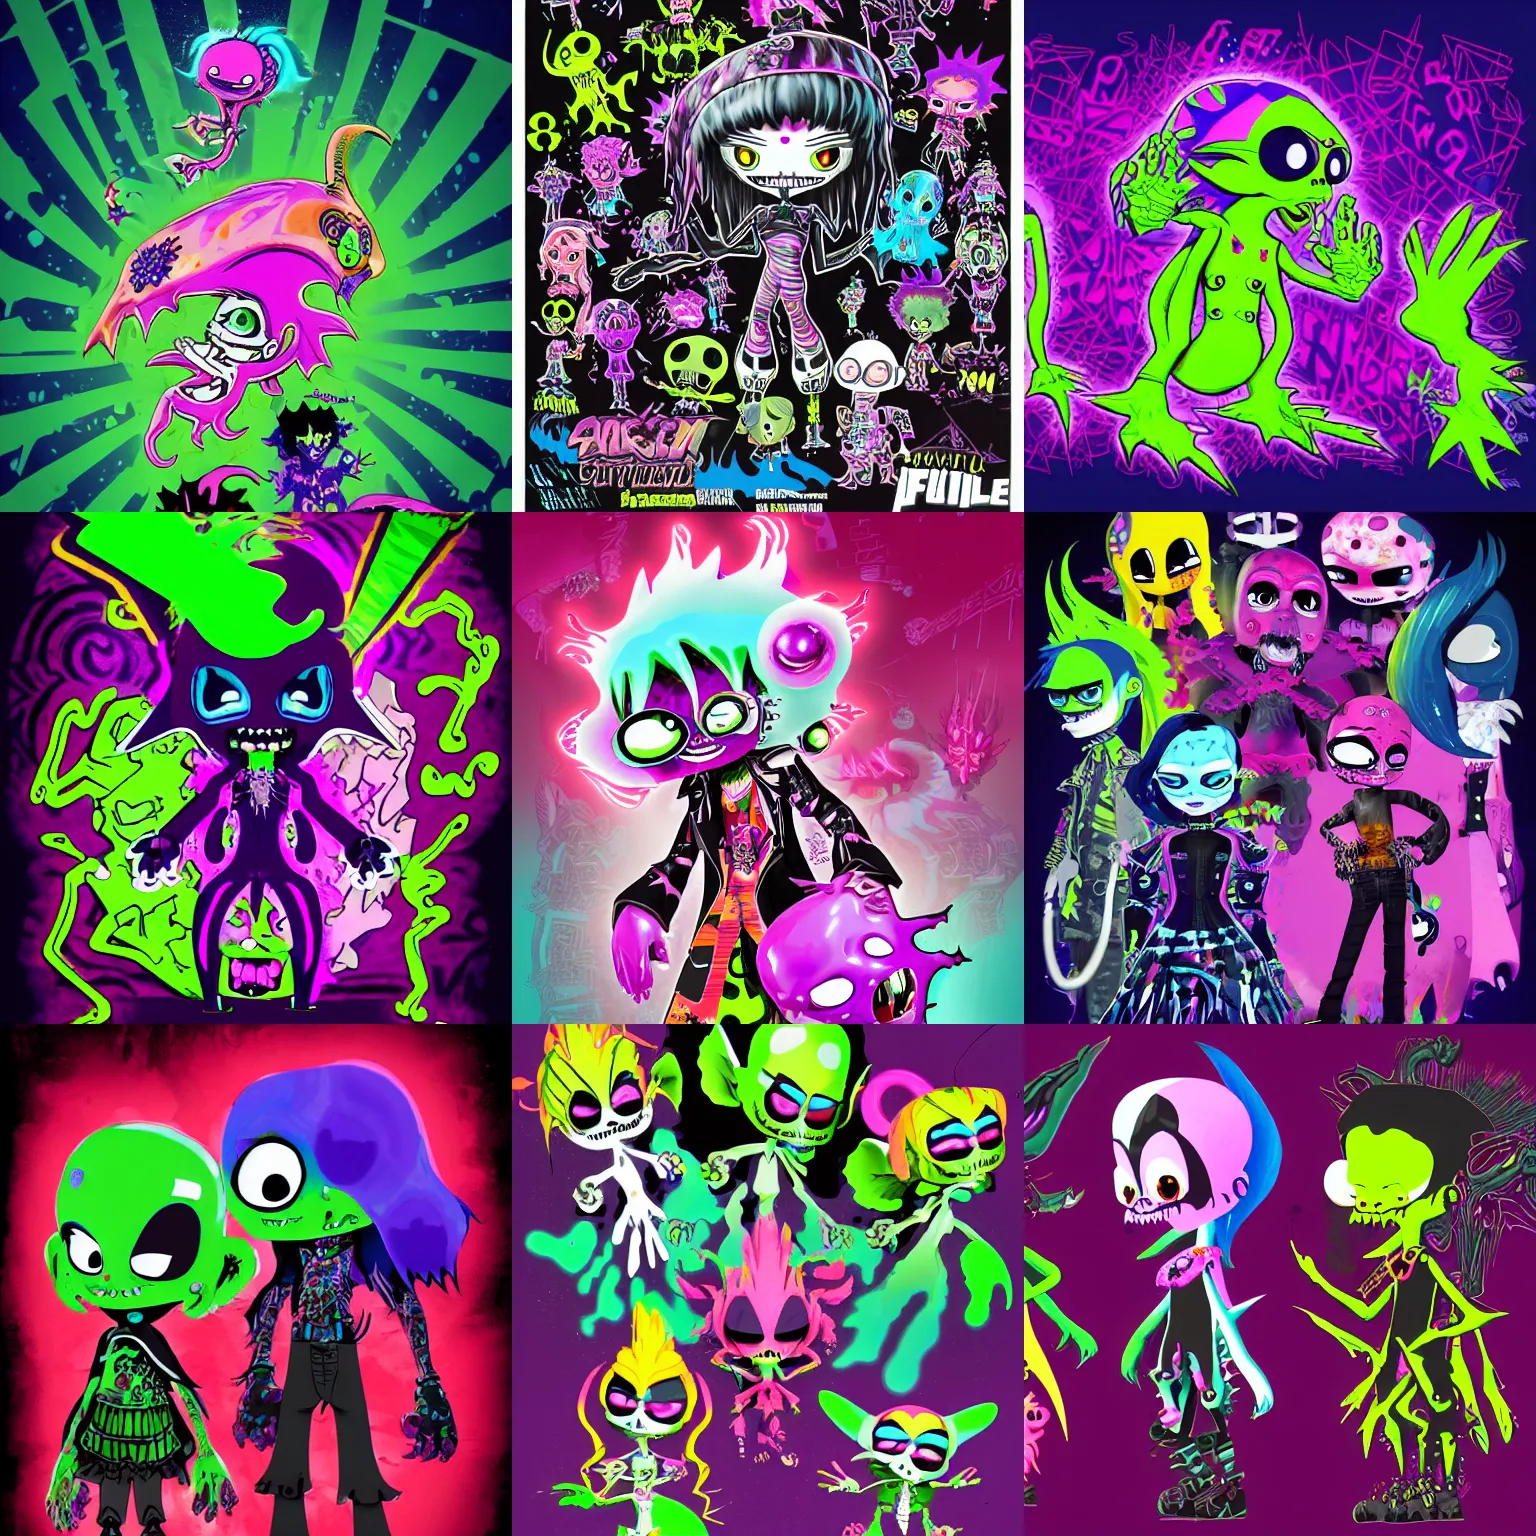 Prompt: CGI lisa frank gothic punk glow in the dark vampiric rockstar vampire squid concept character designs of various shapes and sizes by genndy tartakovsky and the creators of fret nice at pieces interactive and splatoon by nintendo and psychonauts by doublefines tim shafer being overseen by Jamie Hewlett from gorillaz for splatoon by nintendo